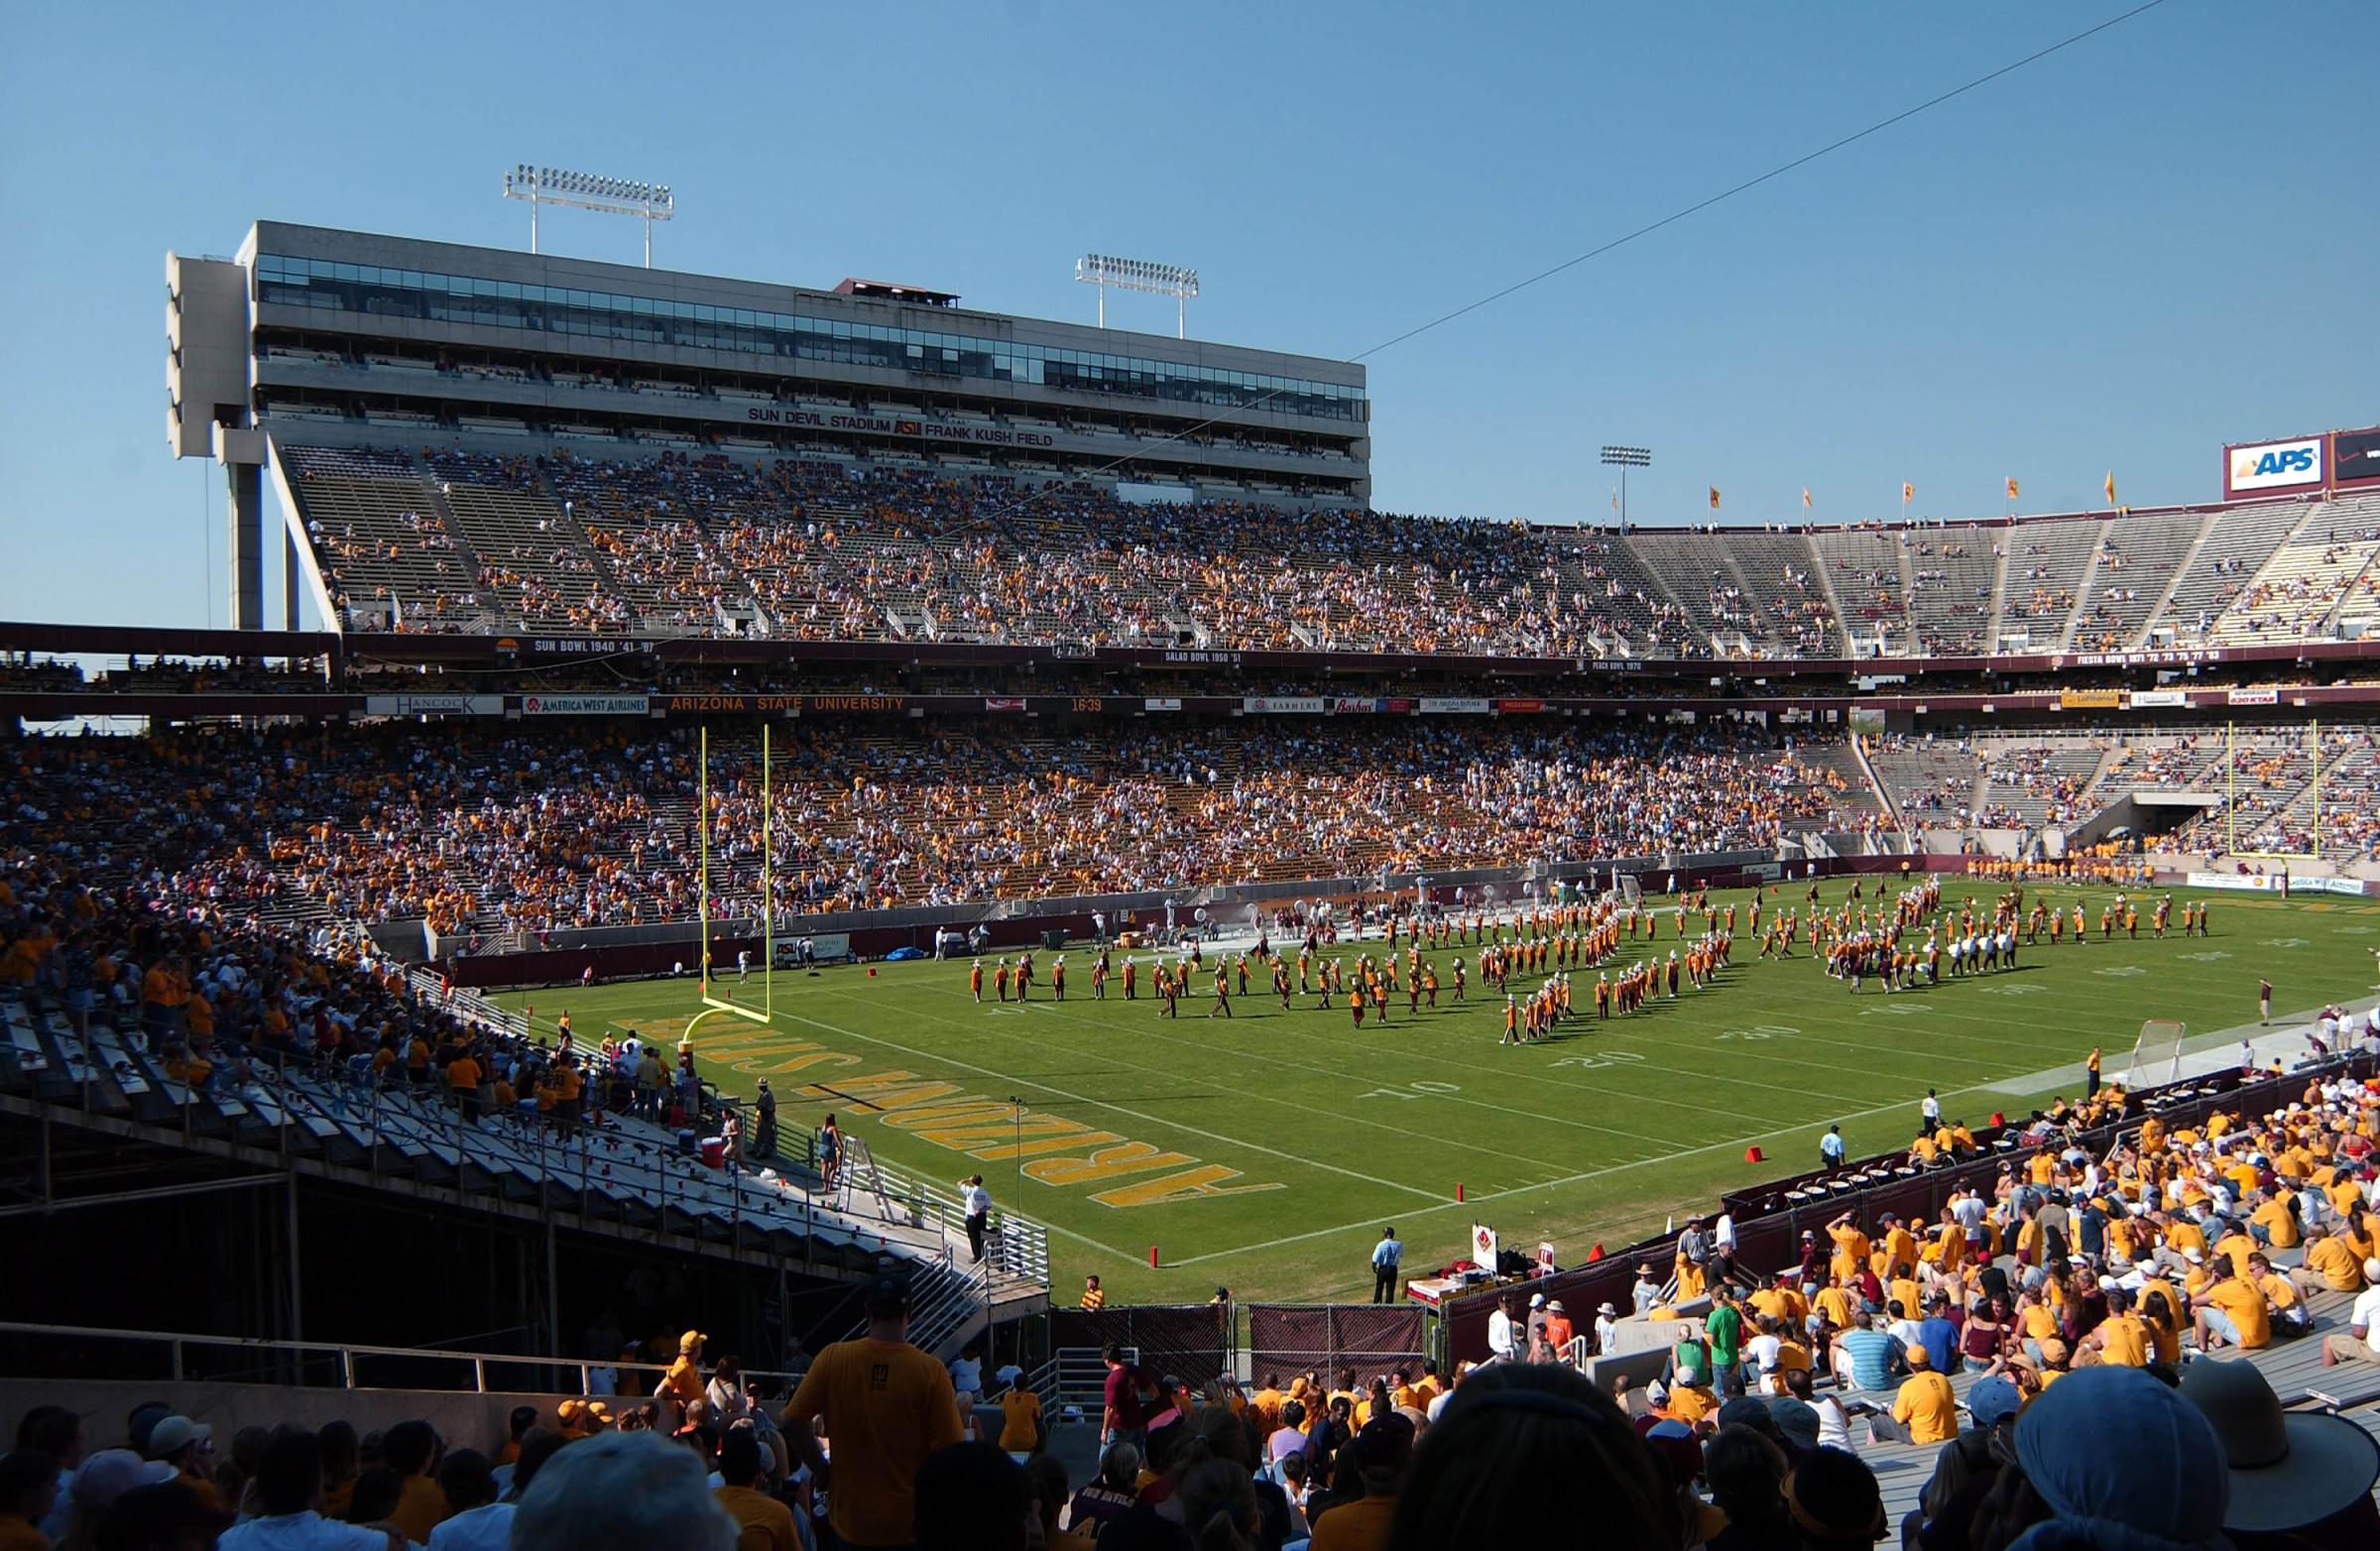 11 Oct 2003: A general view during the Arizona State Sun Devils 59-14 victory over the Oregon Ducks at Sun Devil Stadium in Tempe, AZ.